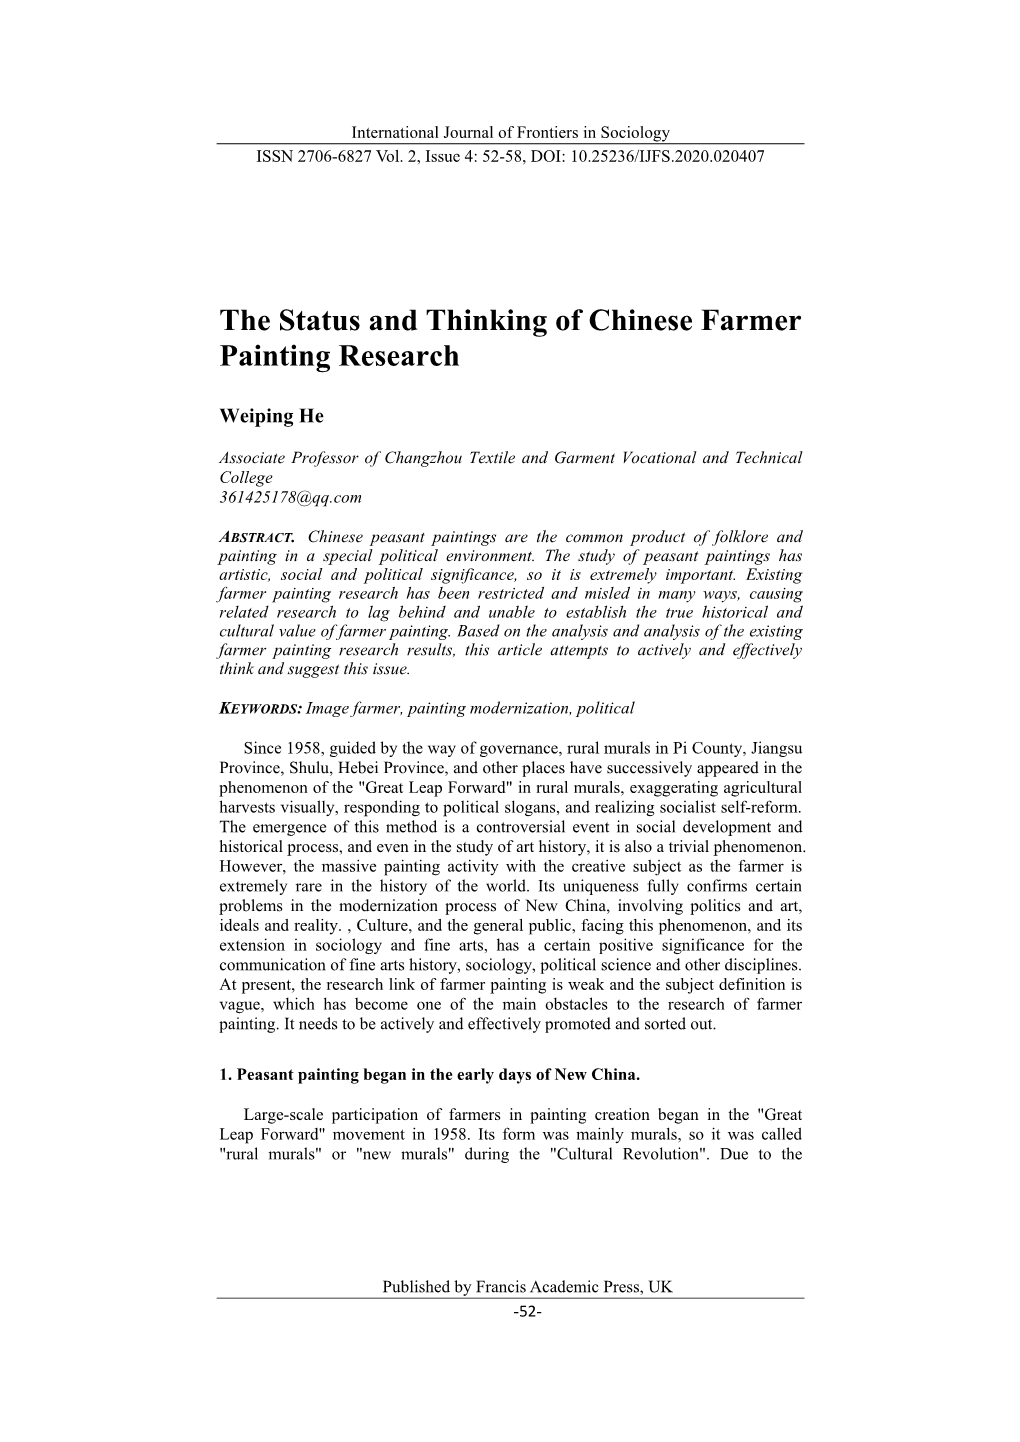 The Status and Thinking of Chinese Farmer Painting Research